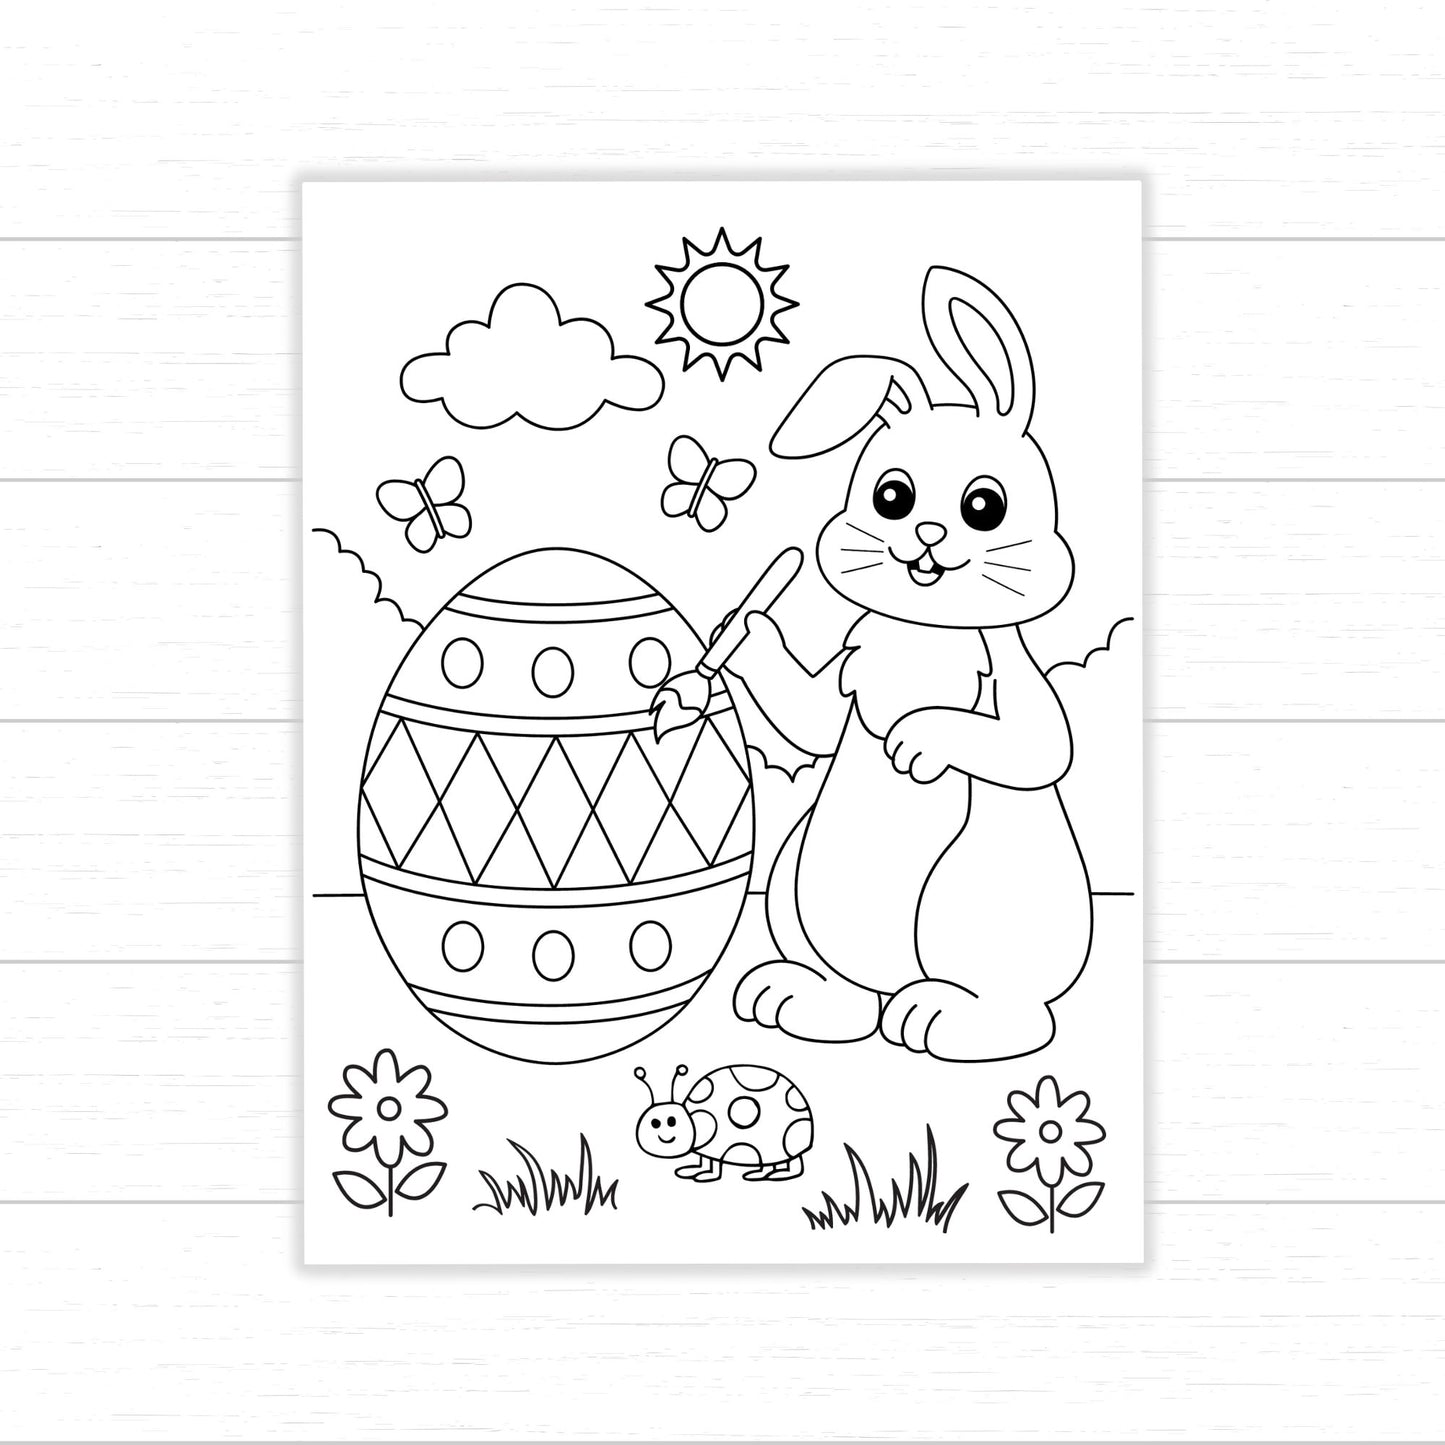 Easter Bunny Coloring Pages, Spring Coloring Pages, Easter Activities for Kids, Easter Coloring, Bunny Activities, Rabbit Coloring Pages